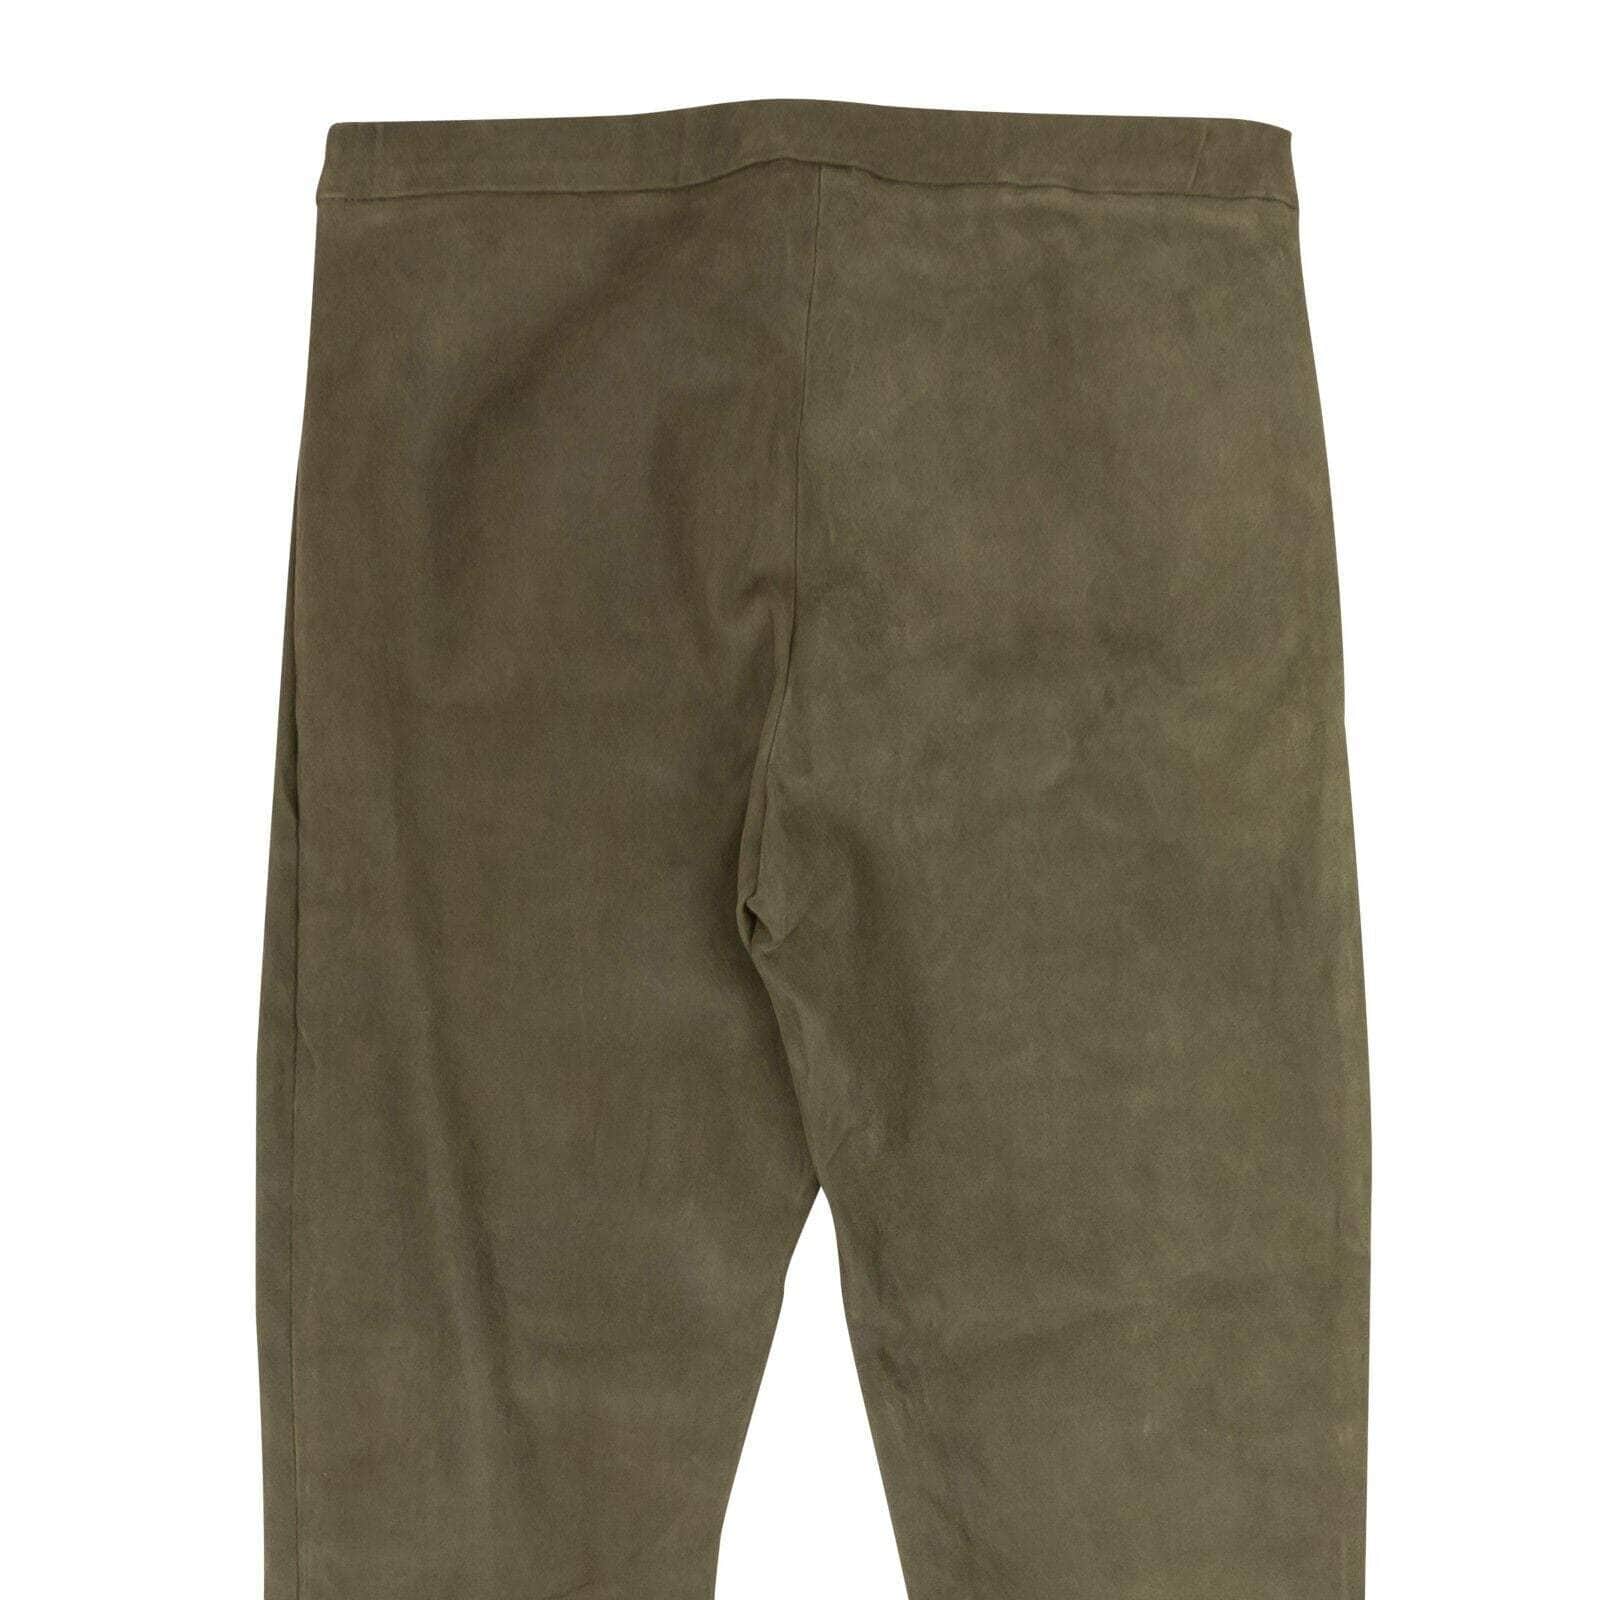 Haider Ackermann 1000-2000, channelenable-all, chicmi, couponcollection, gender-womens, haider-ackermann, main-clothing, size-40, womens-leggings 40 Green Suede Leather Leggings 95-HAN-1003/40 95-HAN-1003/40